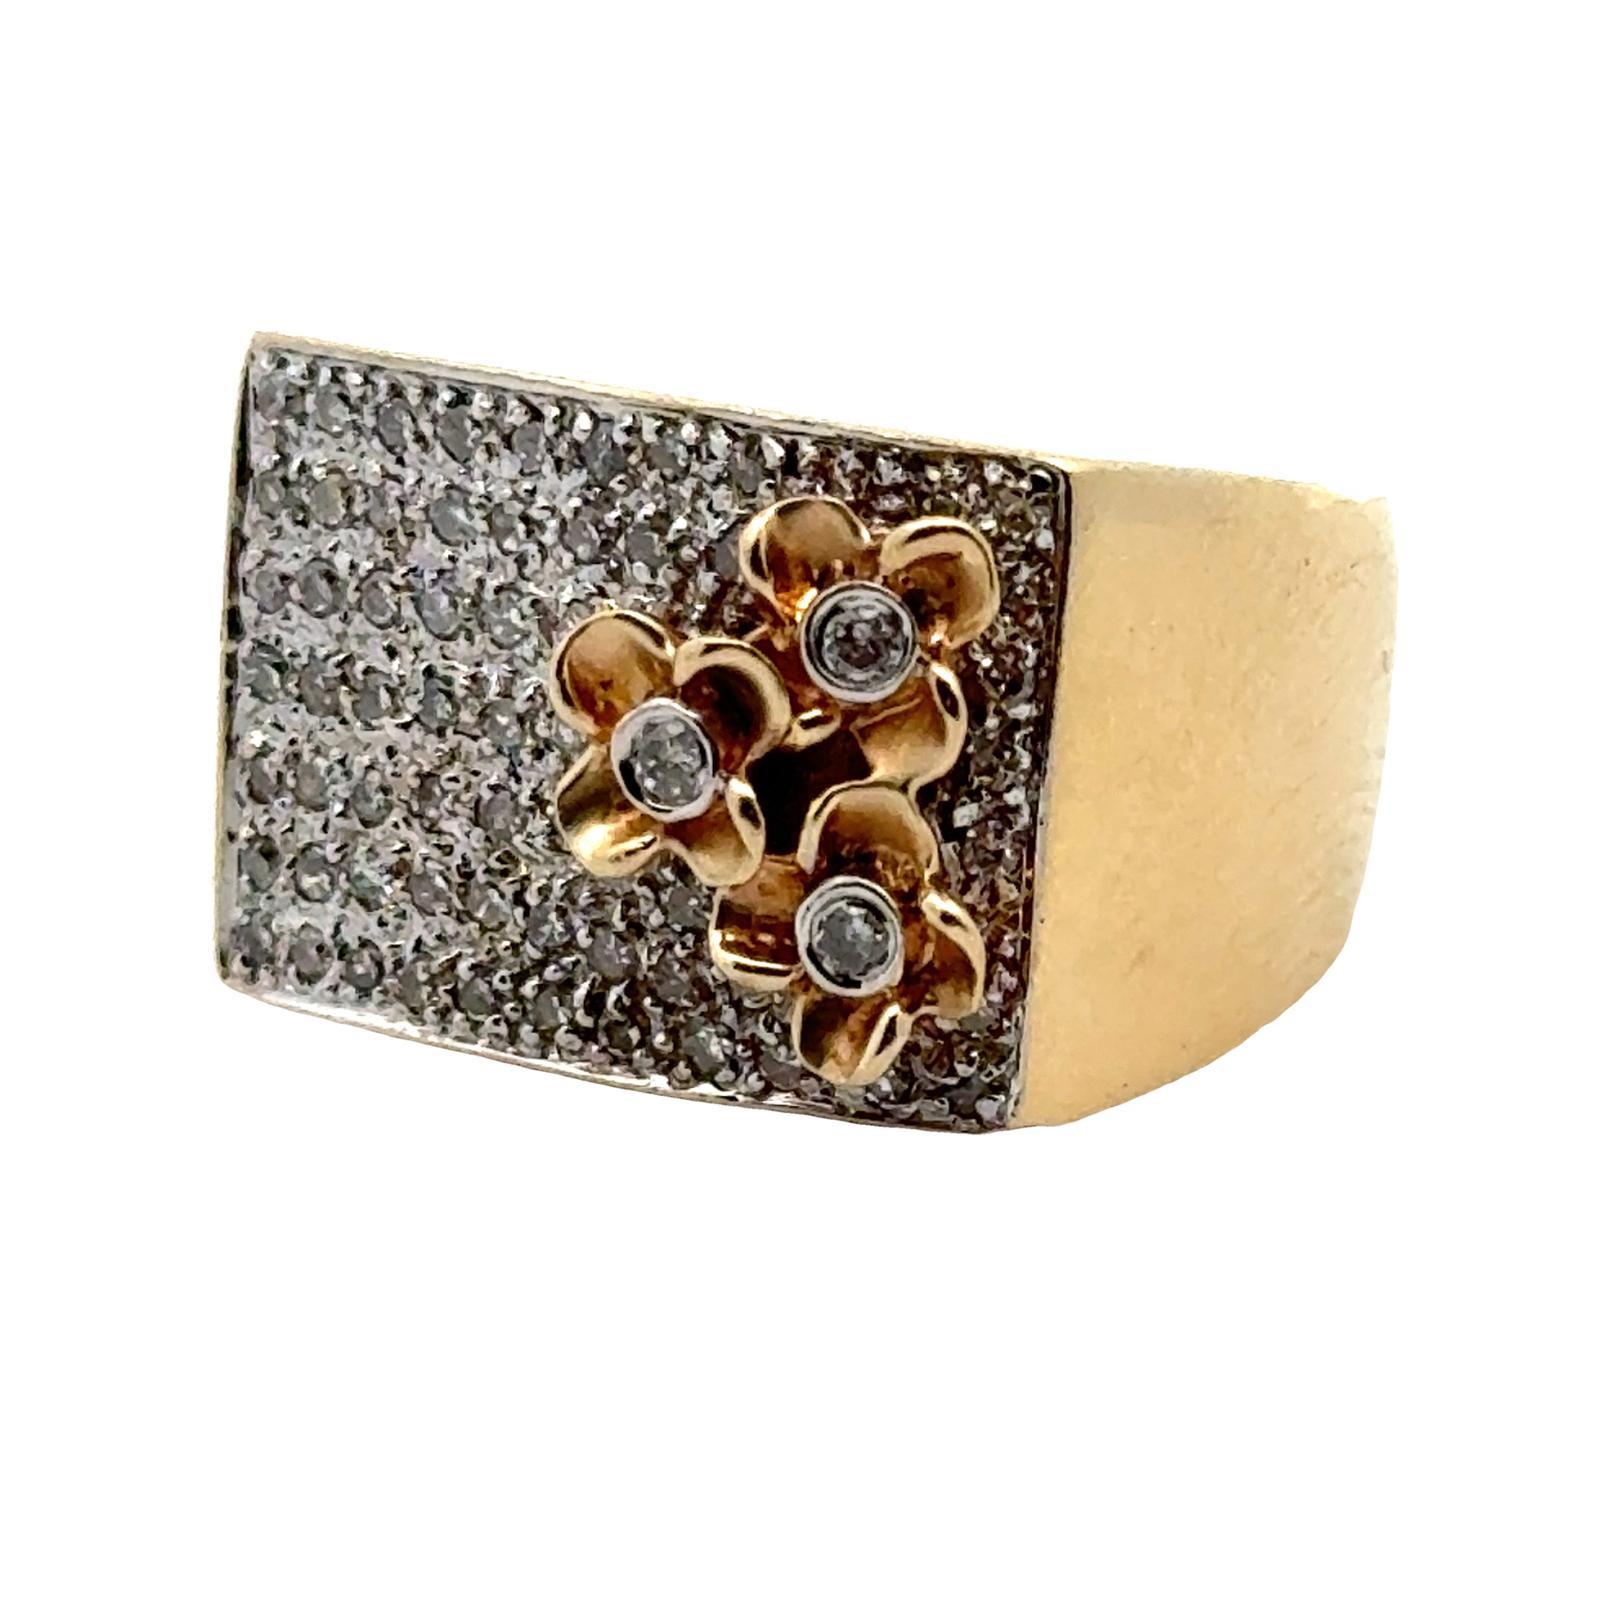 Diamond 14 Karat Yellow Gold Floral Motif Rectangular Vintage Ring In Excellent Condition For Sale In Boca Raton, FL